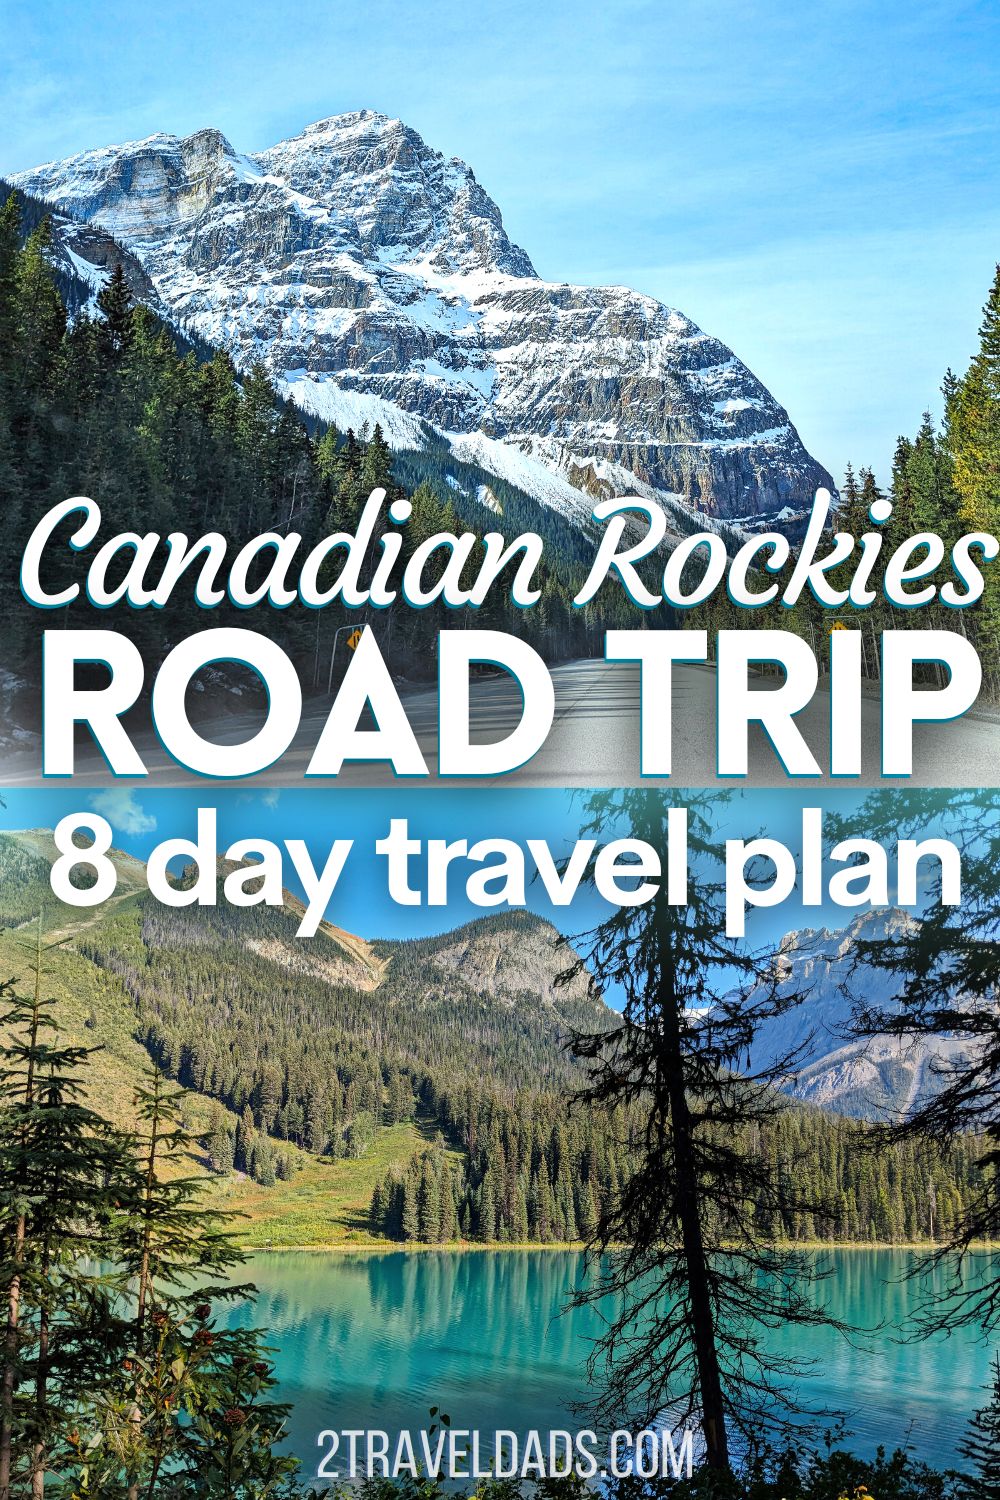 The Canadian Rockies road trip is one of the most beautiful drives in Canada. Visiting Banff, Yoho, Kootenay, Glacier, Mount Revelstoke AND Jasper National Parks, this is the ultimate summer road trip plan.